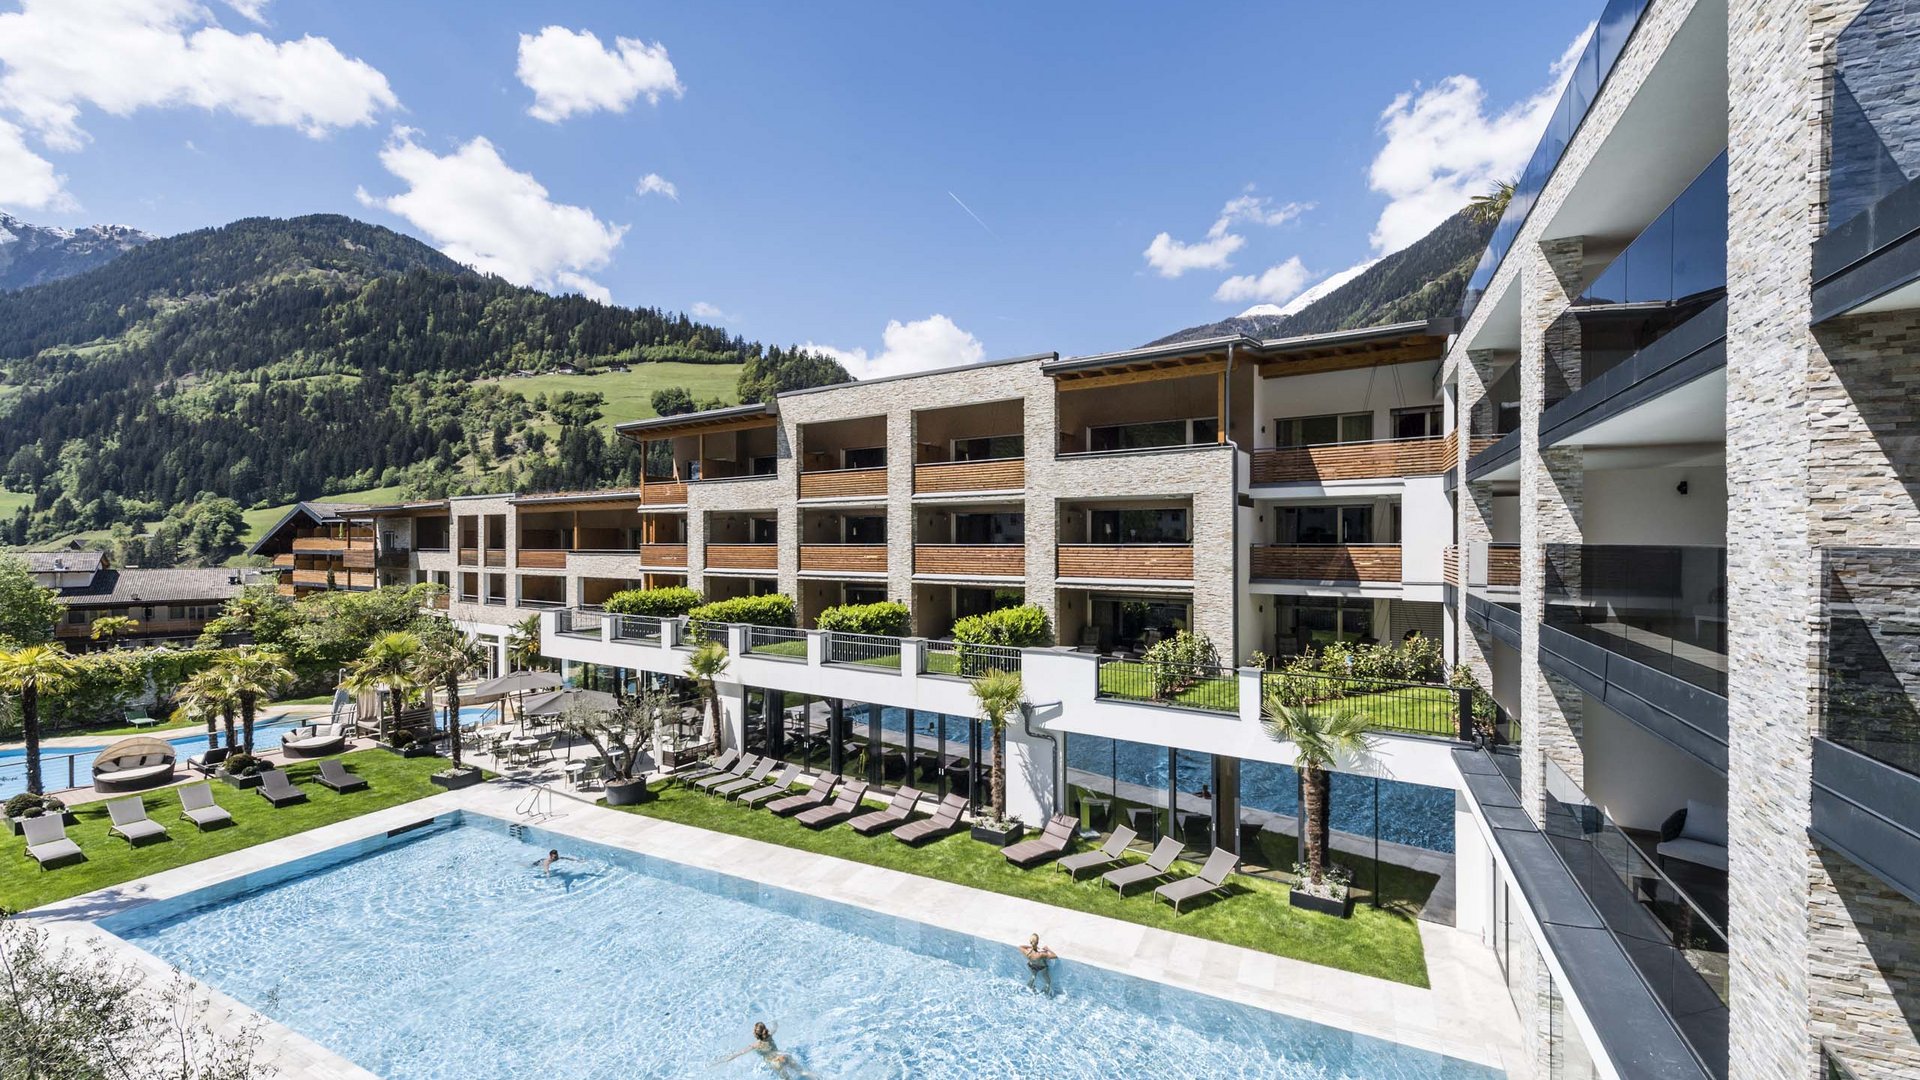 Hotel in Val Passiria/Passeiertal with 4-Star Superior